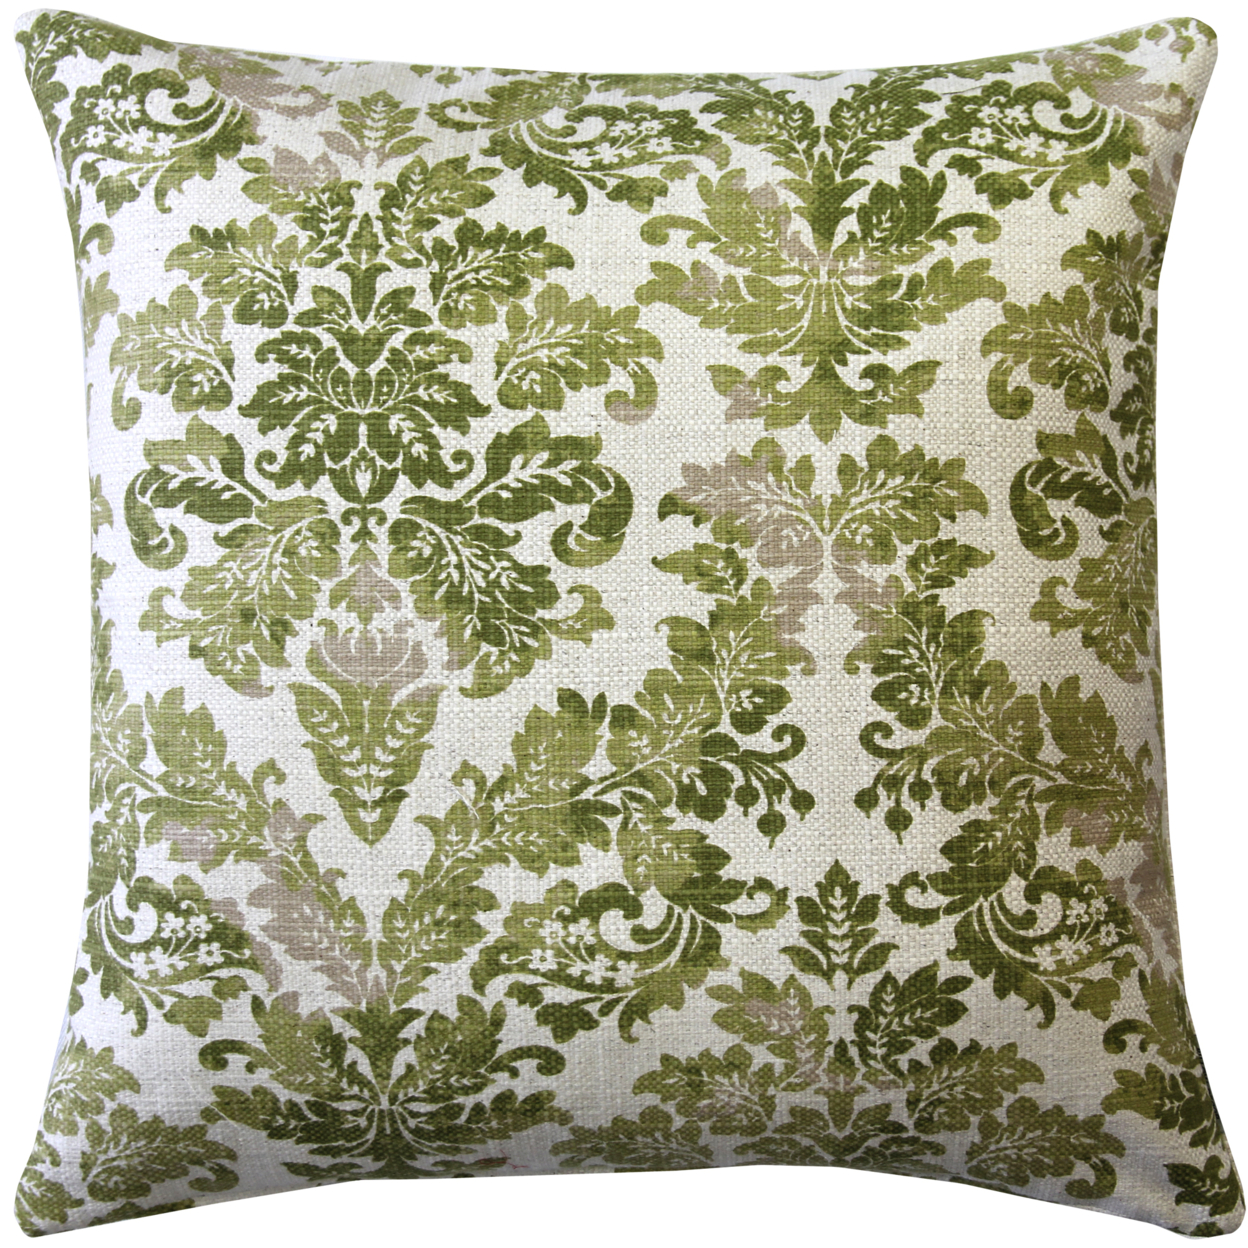 Calliope Green Damask Pattern Throw Pillow 20x20 Inches Square, Complete Pillow with Polyfill Pillow Insert